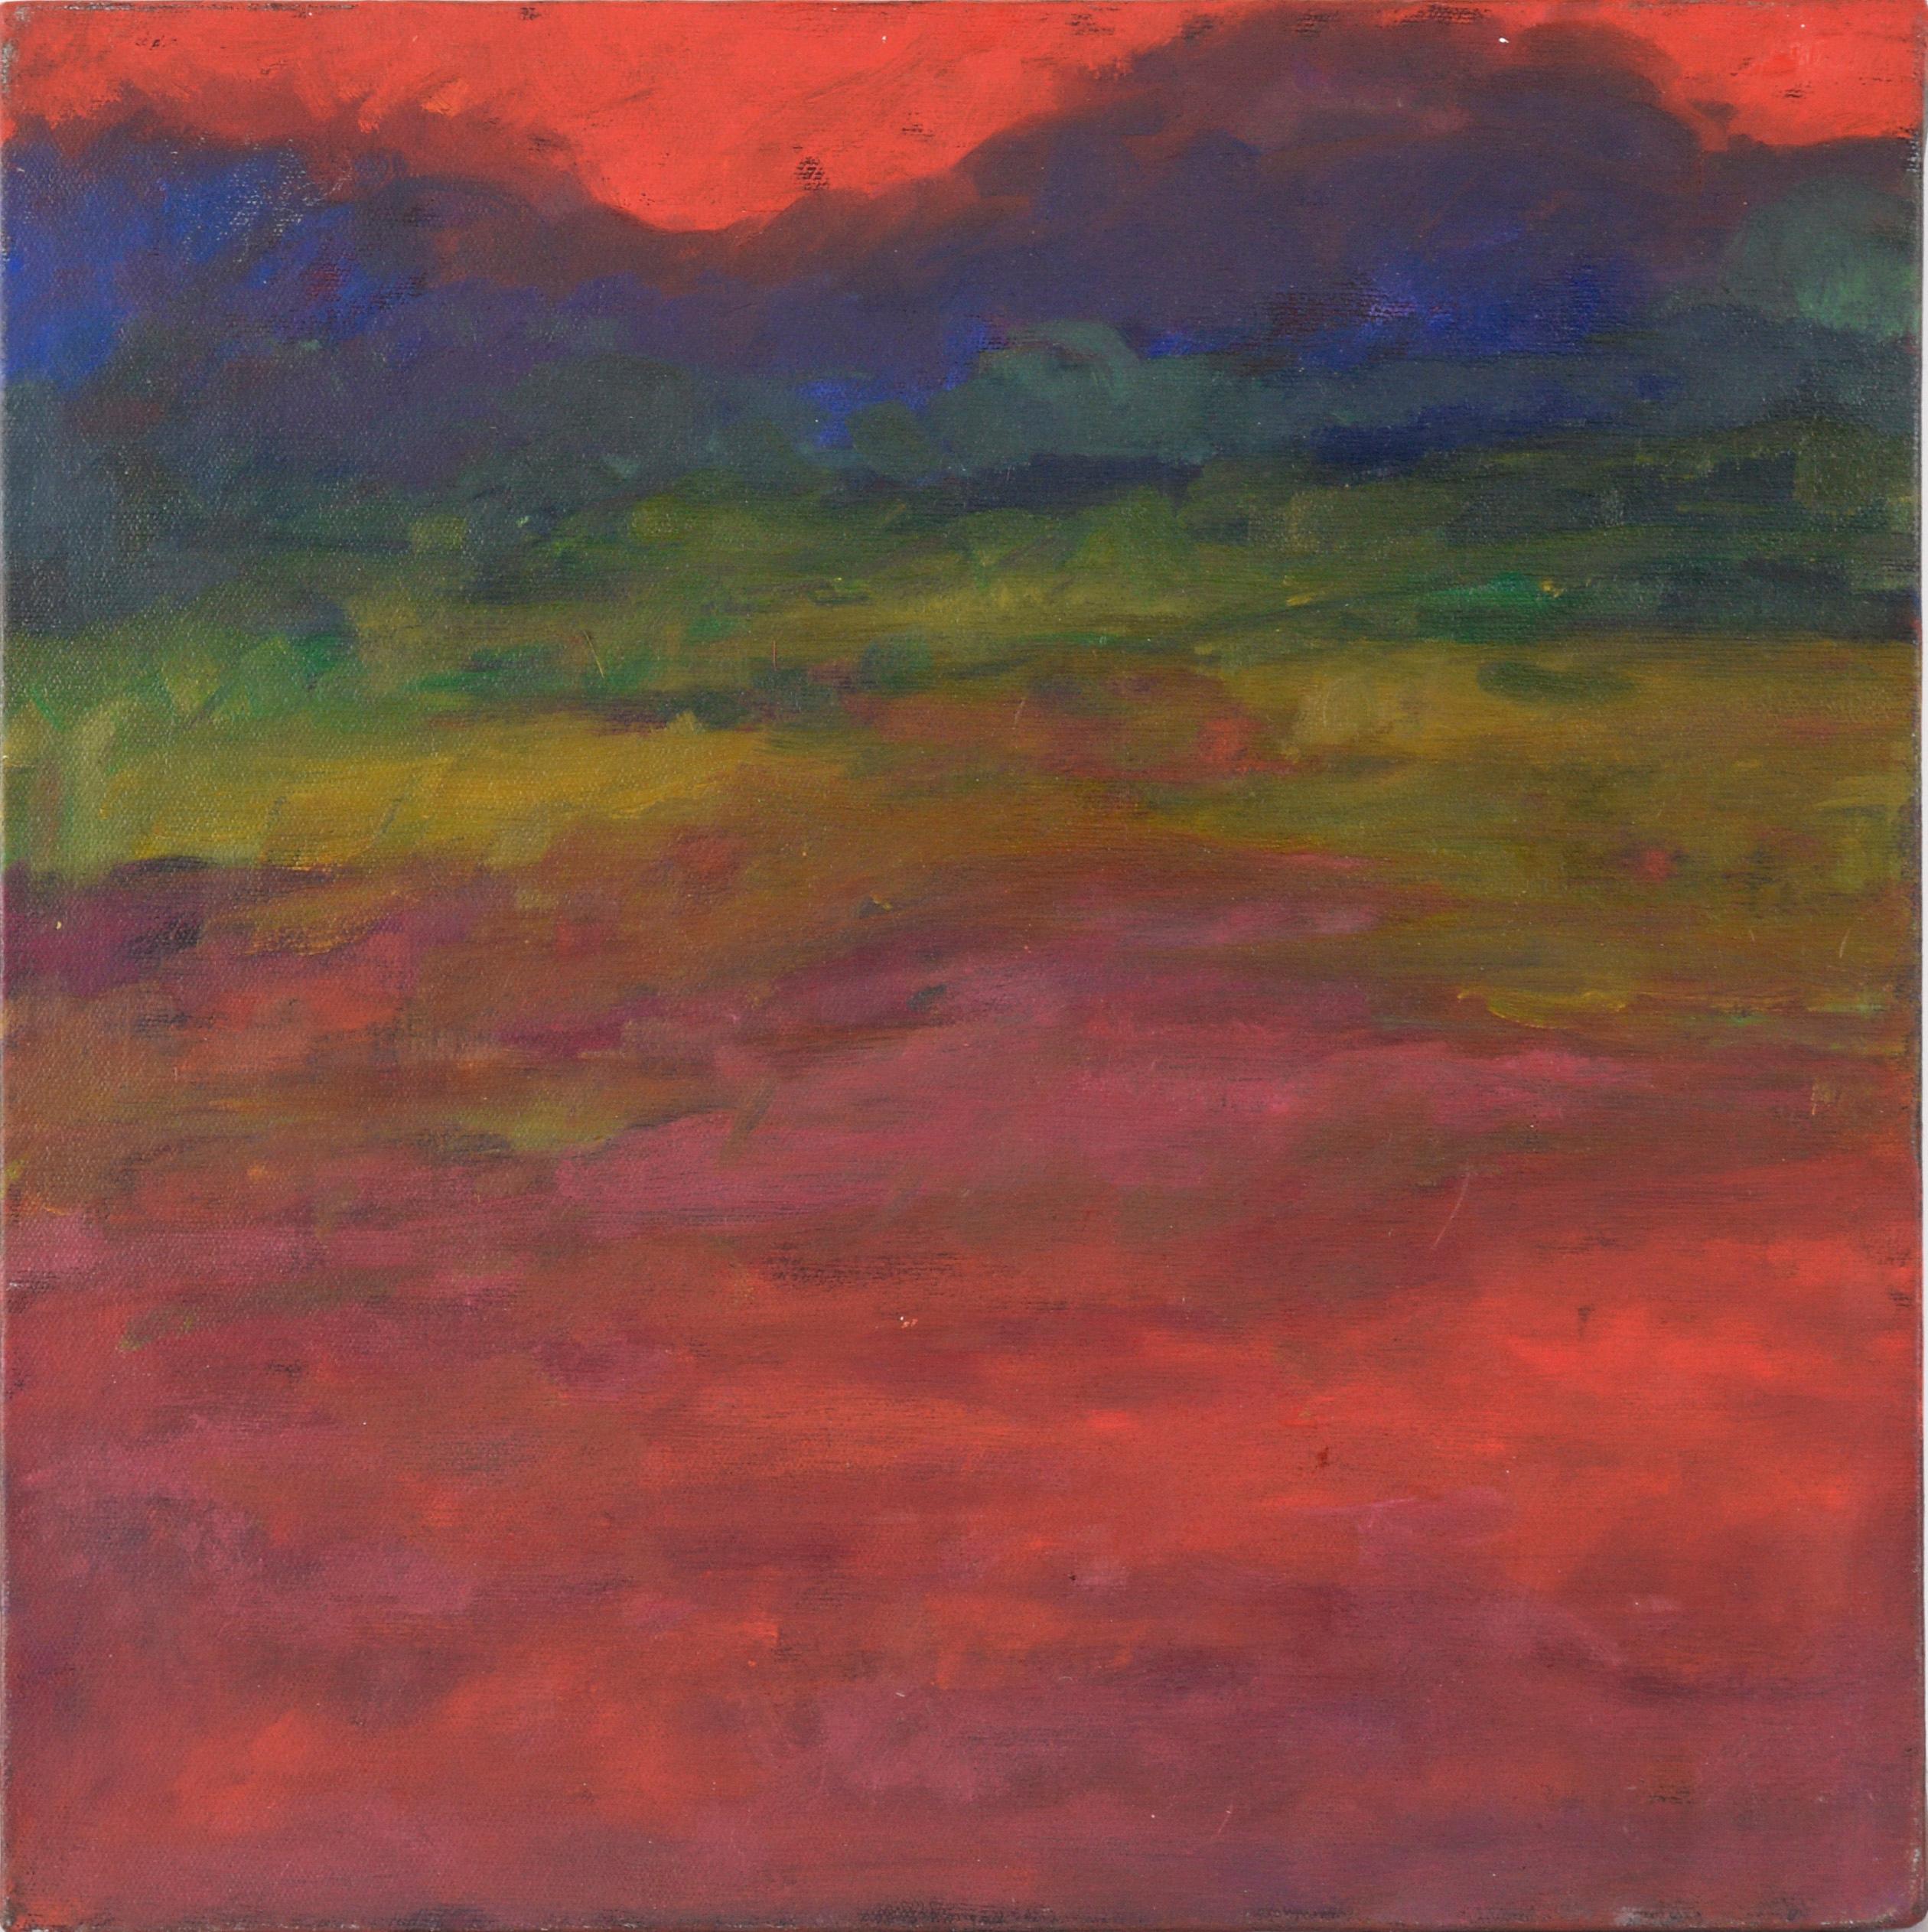 Glowing Red Sunset - Abstracted Landscape in Acrylic on Canvas